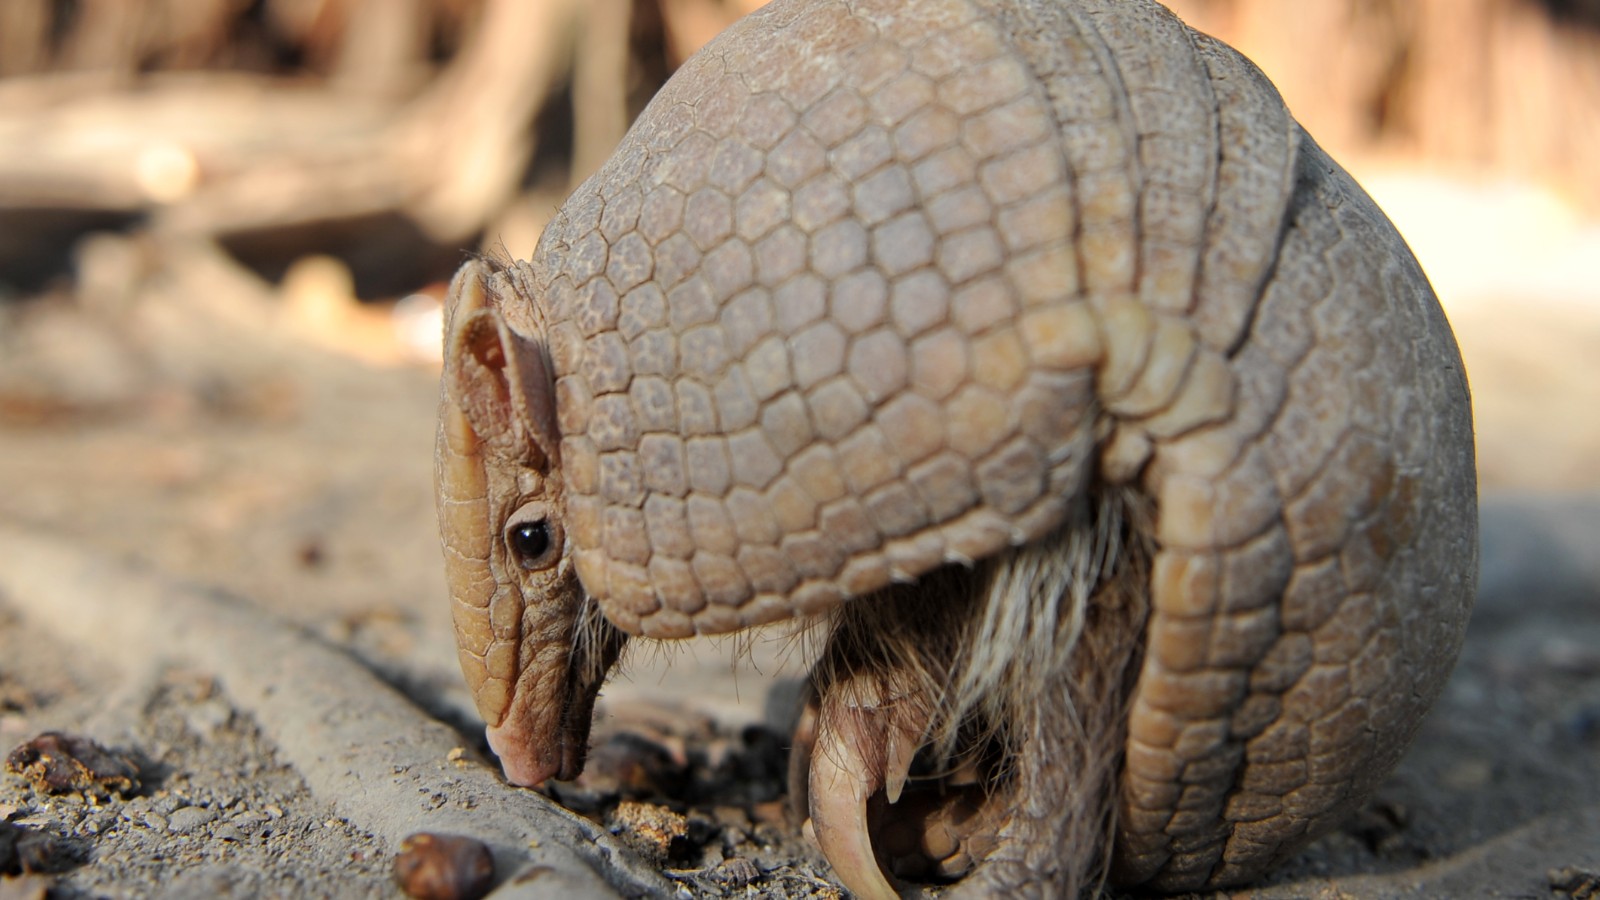 Armadillos Cause Spike In Leprosy Cases In Florida Cnn,Types Of Woodpeckers In Ohio